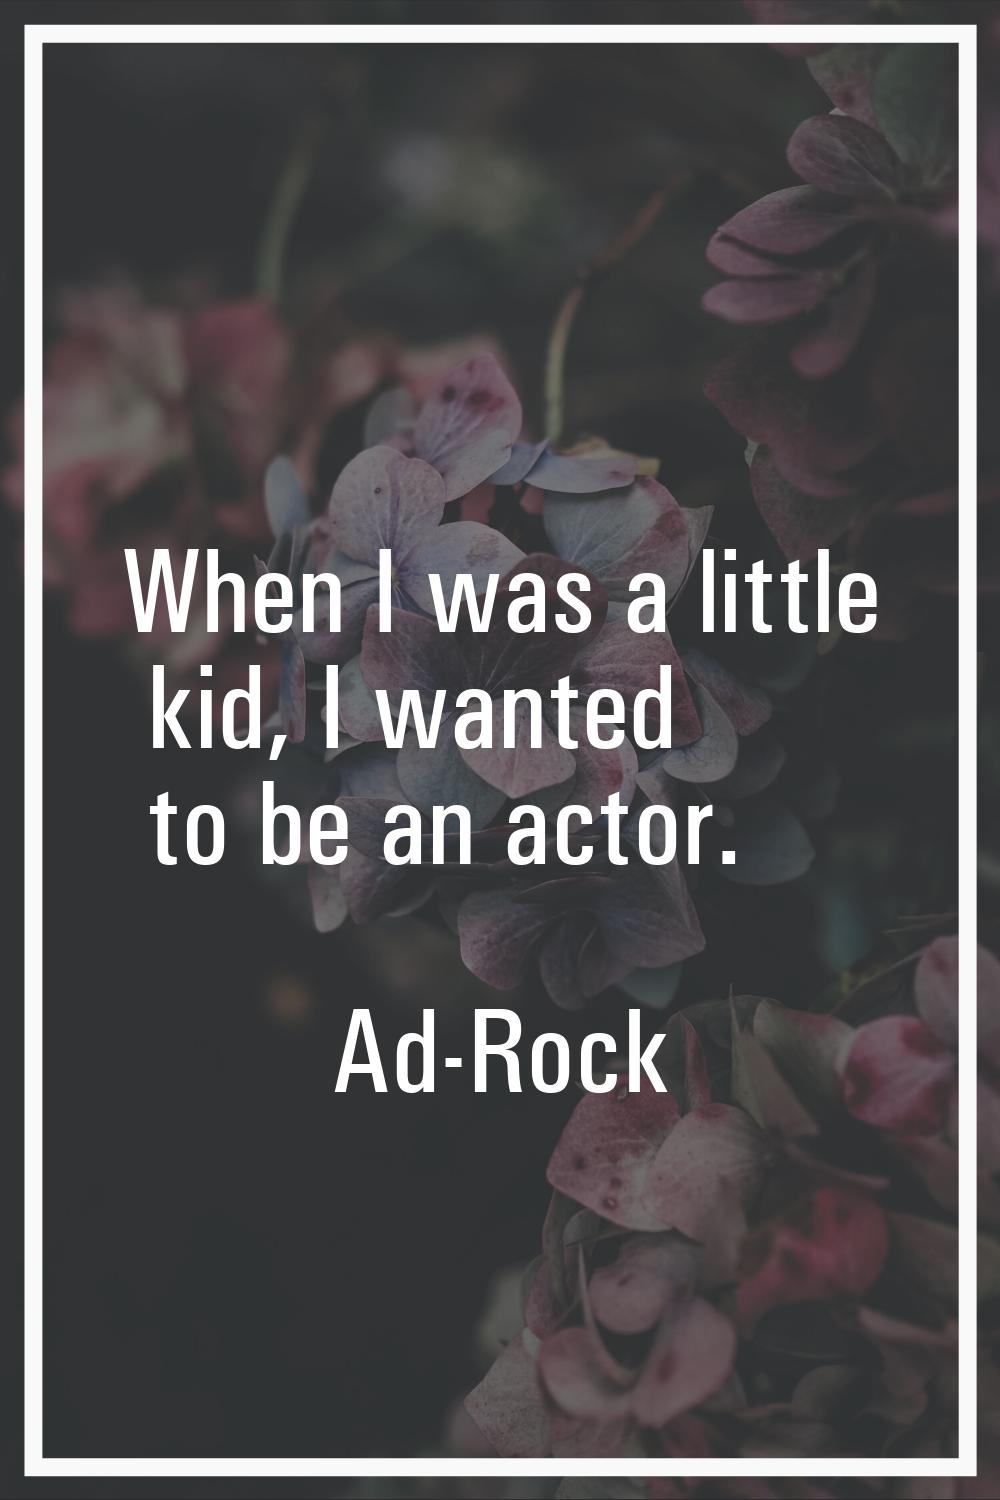 When I was a little kid, I wanted to be an actor.